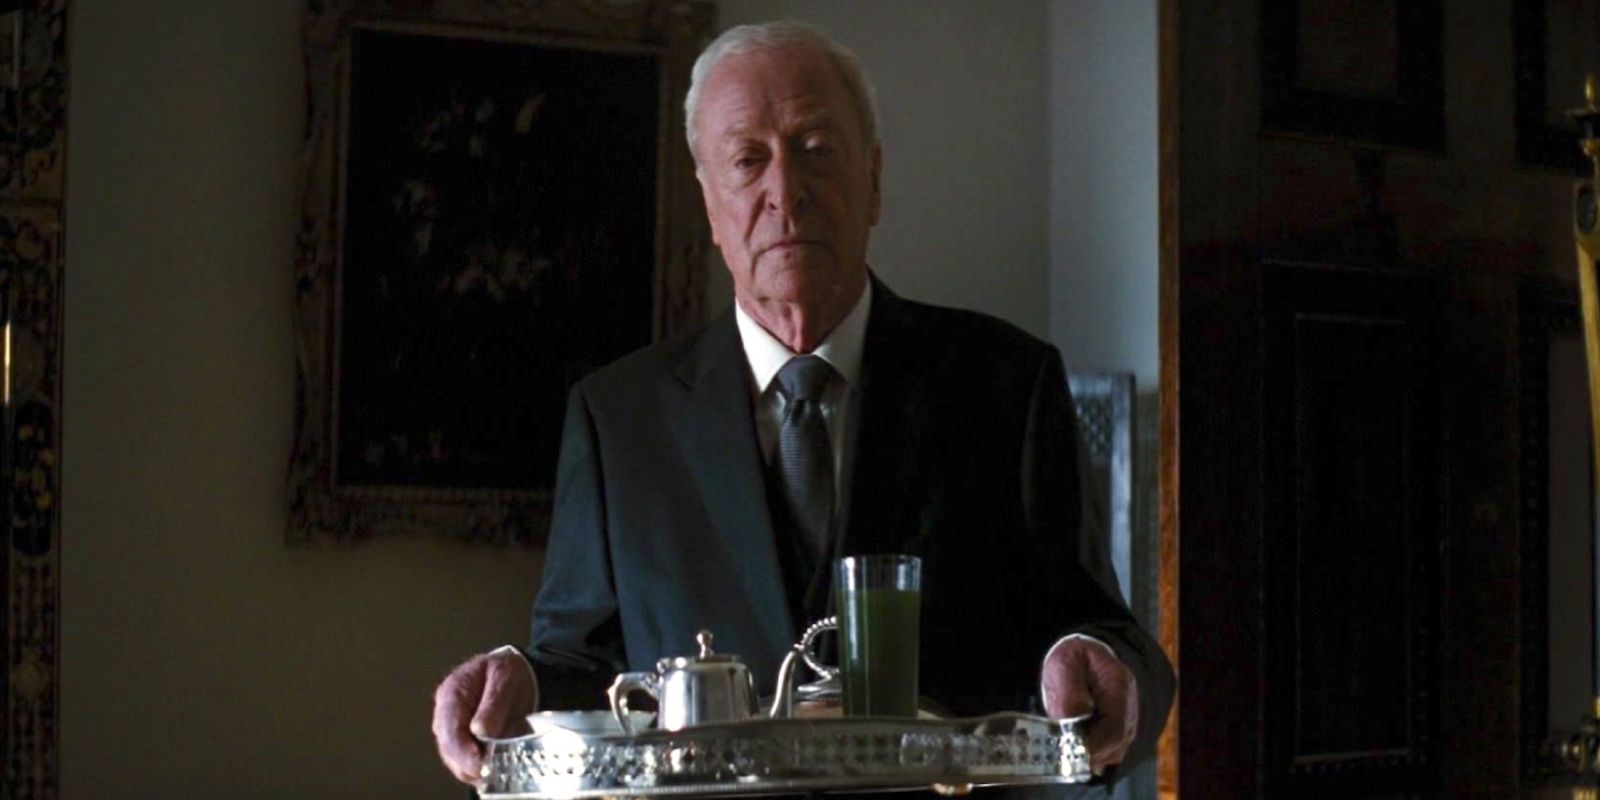 Michael Caine in The Dark Knight Rises 2012